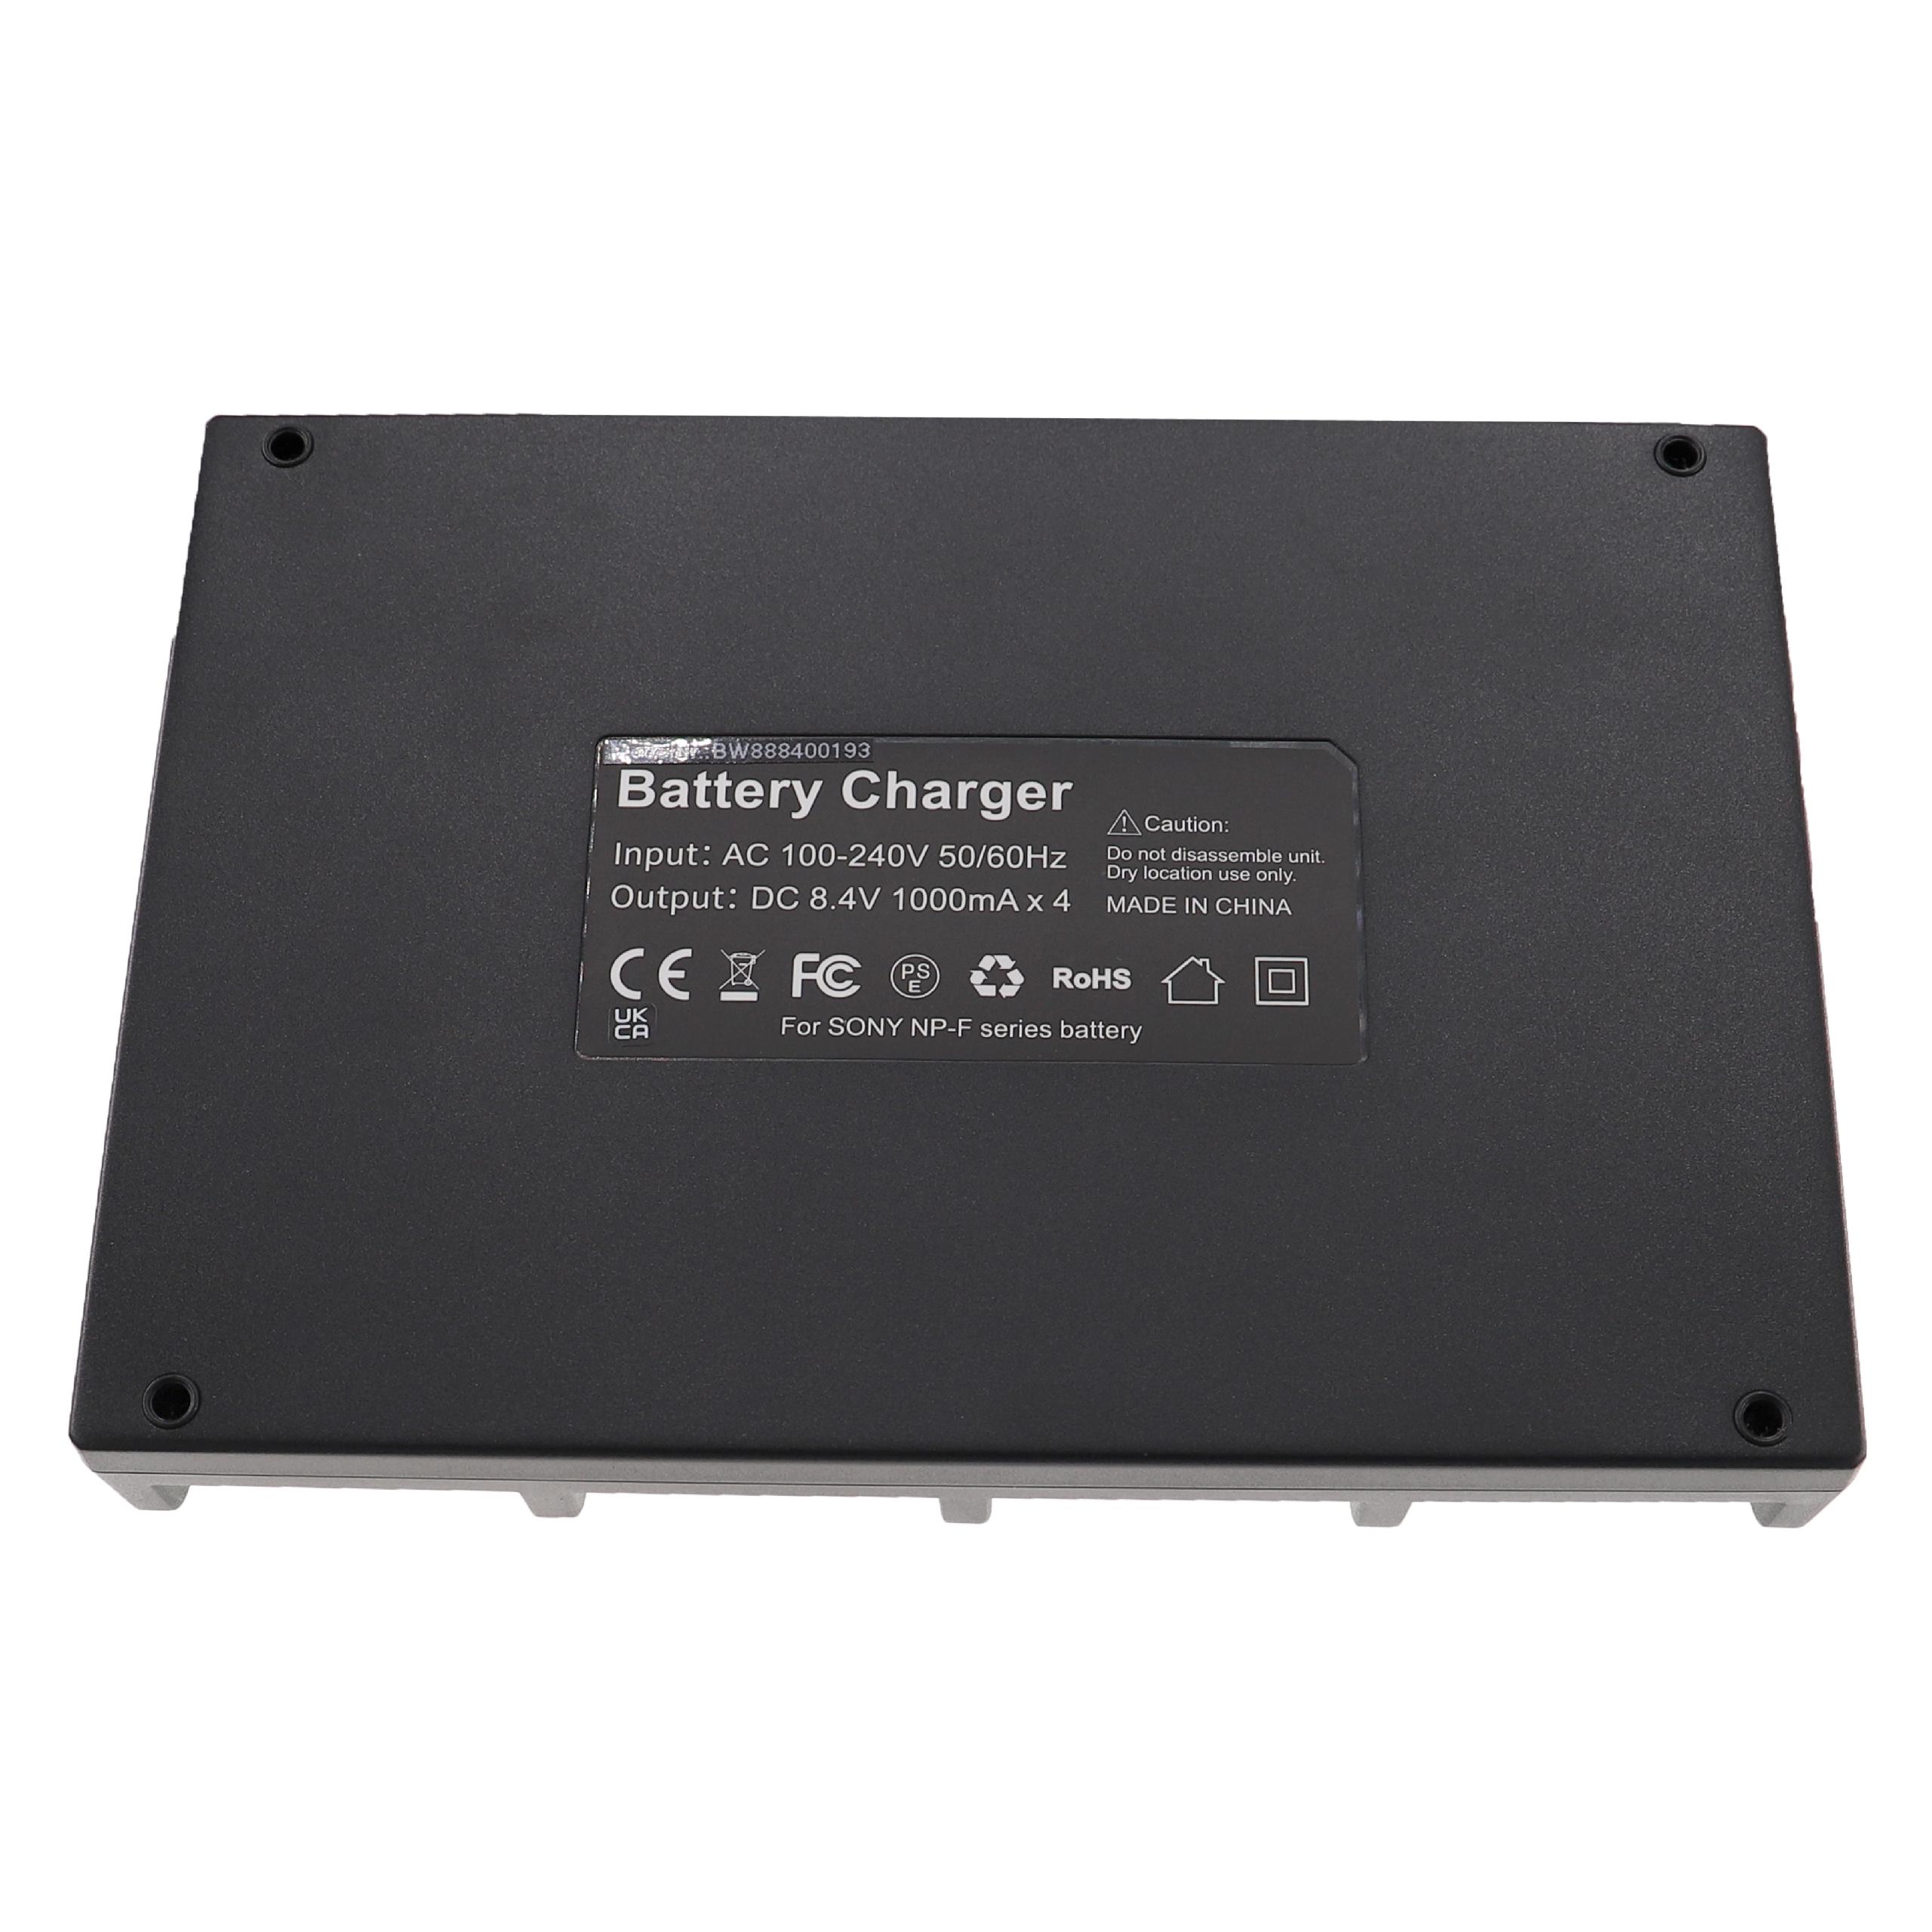 Battery Charger suitable for Sony NP-F960 Camera etc. - 1.0 A, 8.4 V